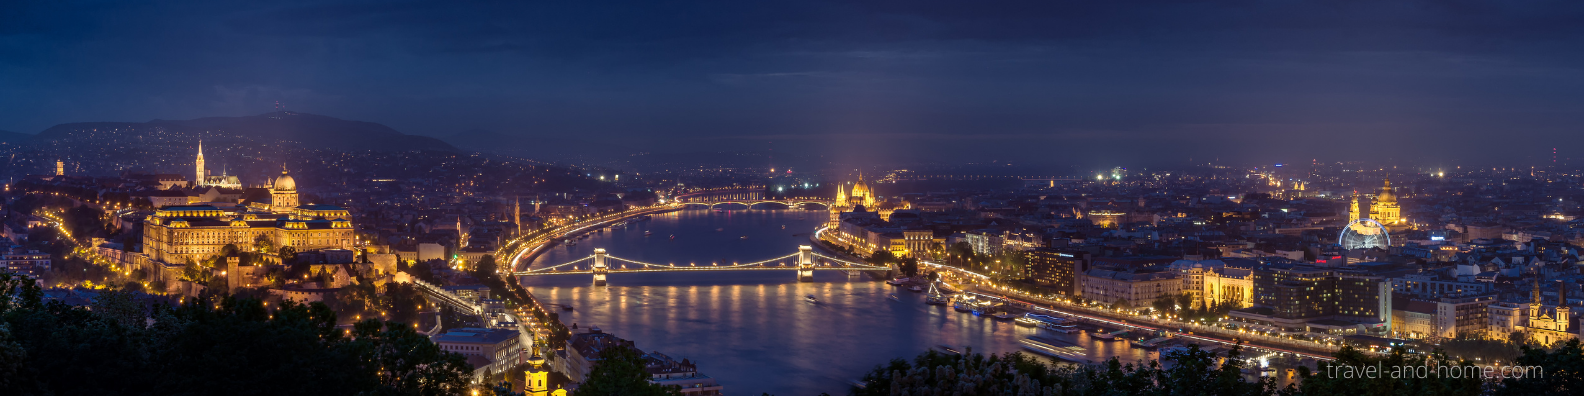 Budapest night Danube river things to do Hungary capital city